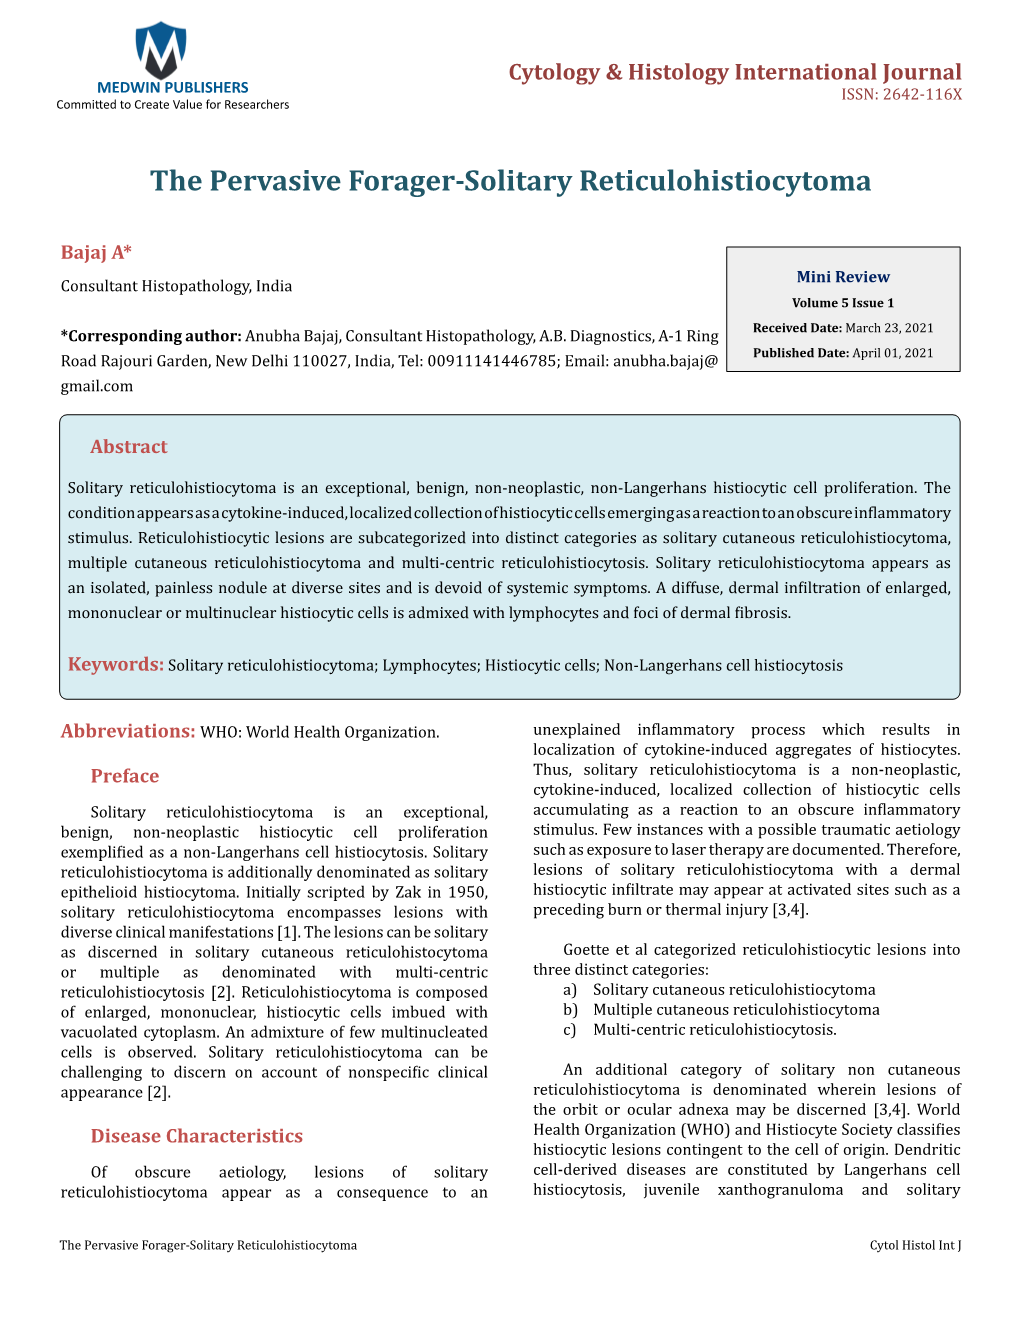 The Pervasive Forager-Solitary Reticulohistiocytoma